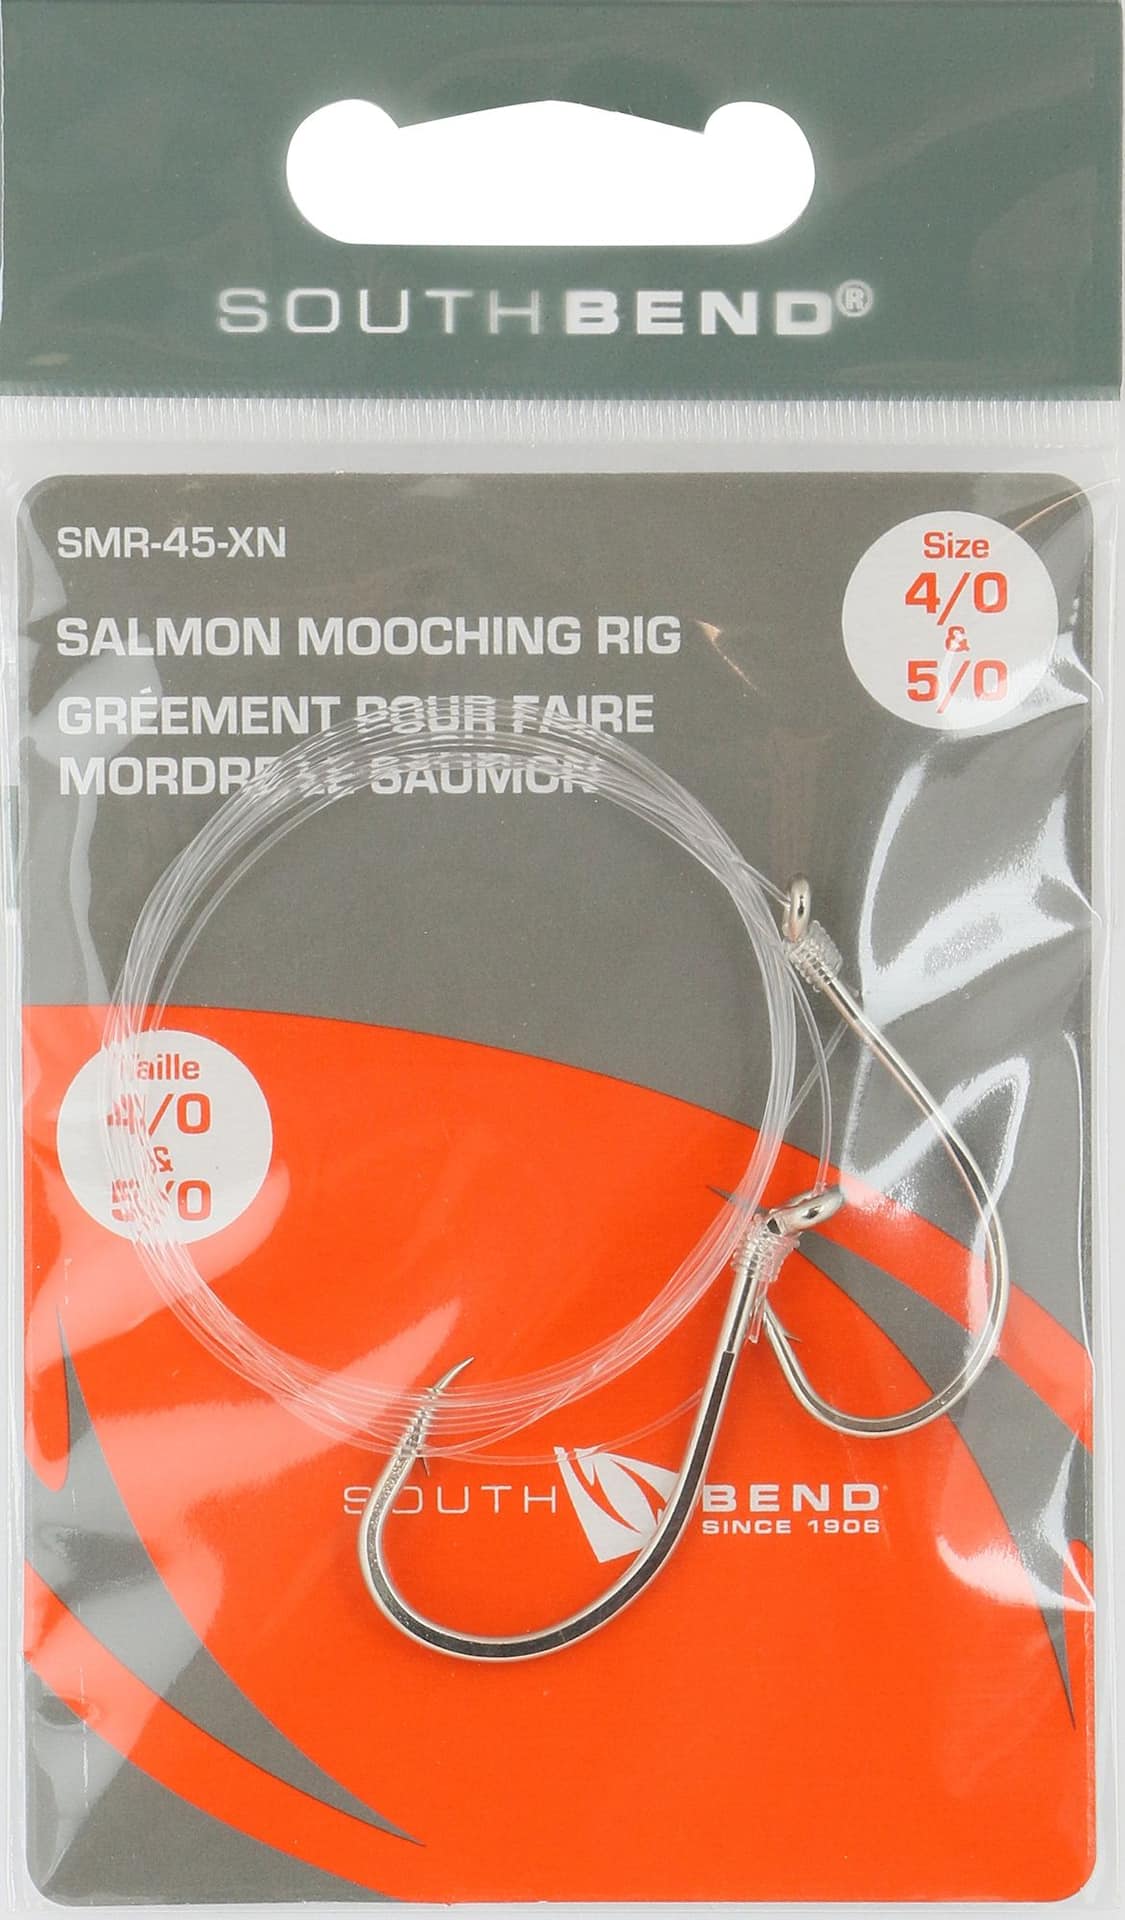 https://media-www.canadiantire.ca/product/playing/fishing/fishing-lures/0789605/south-bend-salmon-rig-slip-tie-4-5-e8e52816-b397-42d9-959c-fcc32b1572c6-jpgrendition.jpg